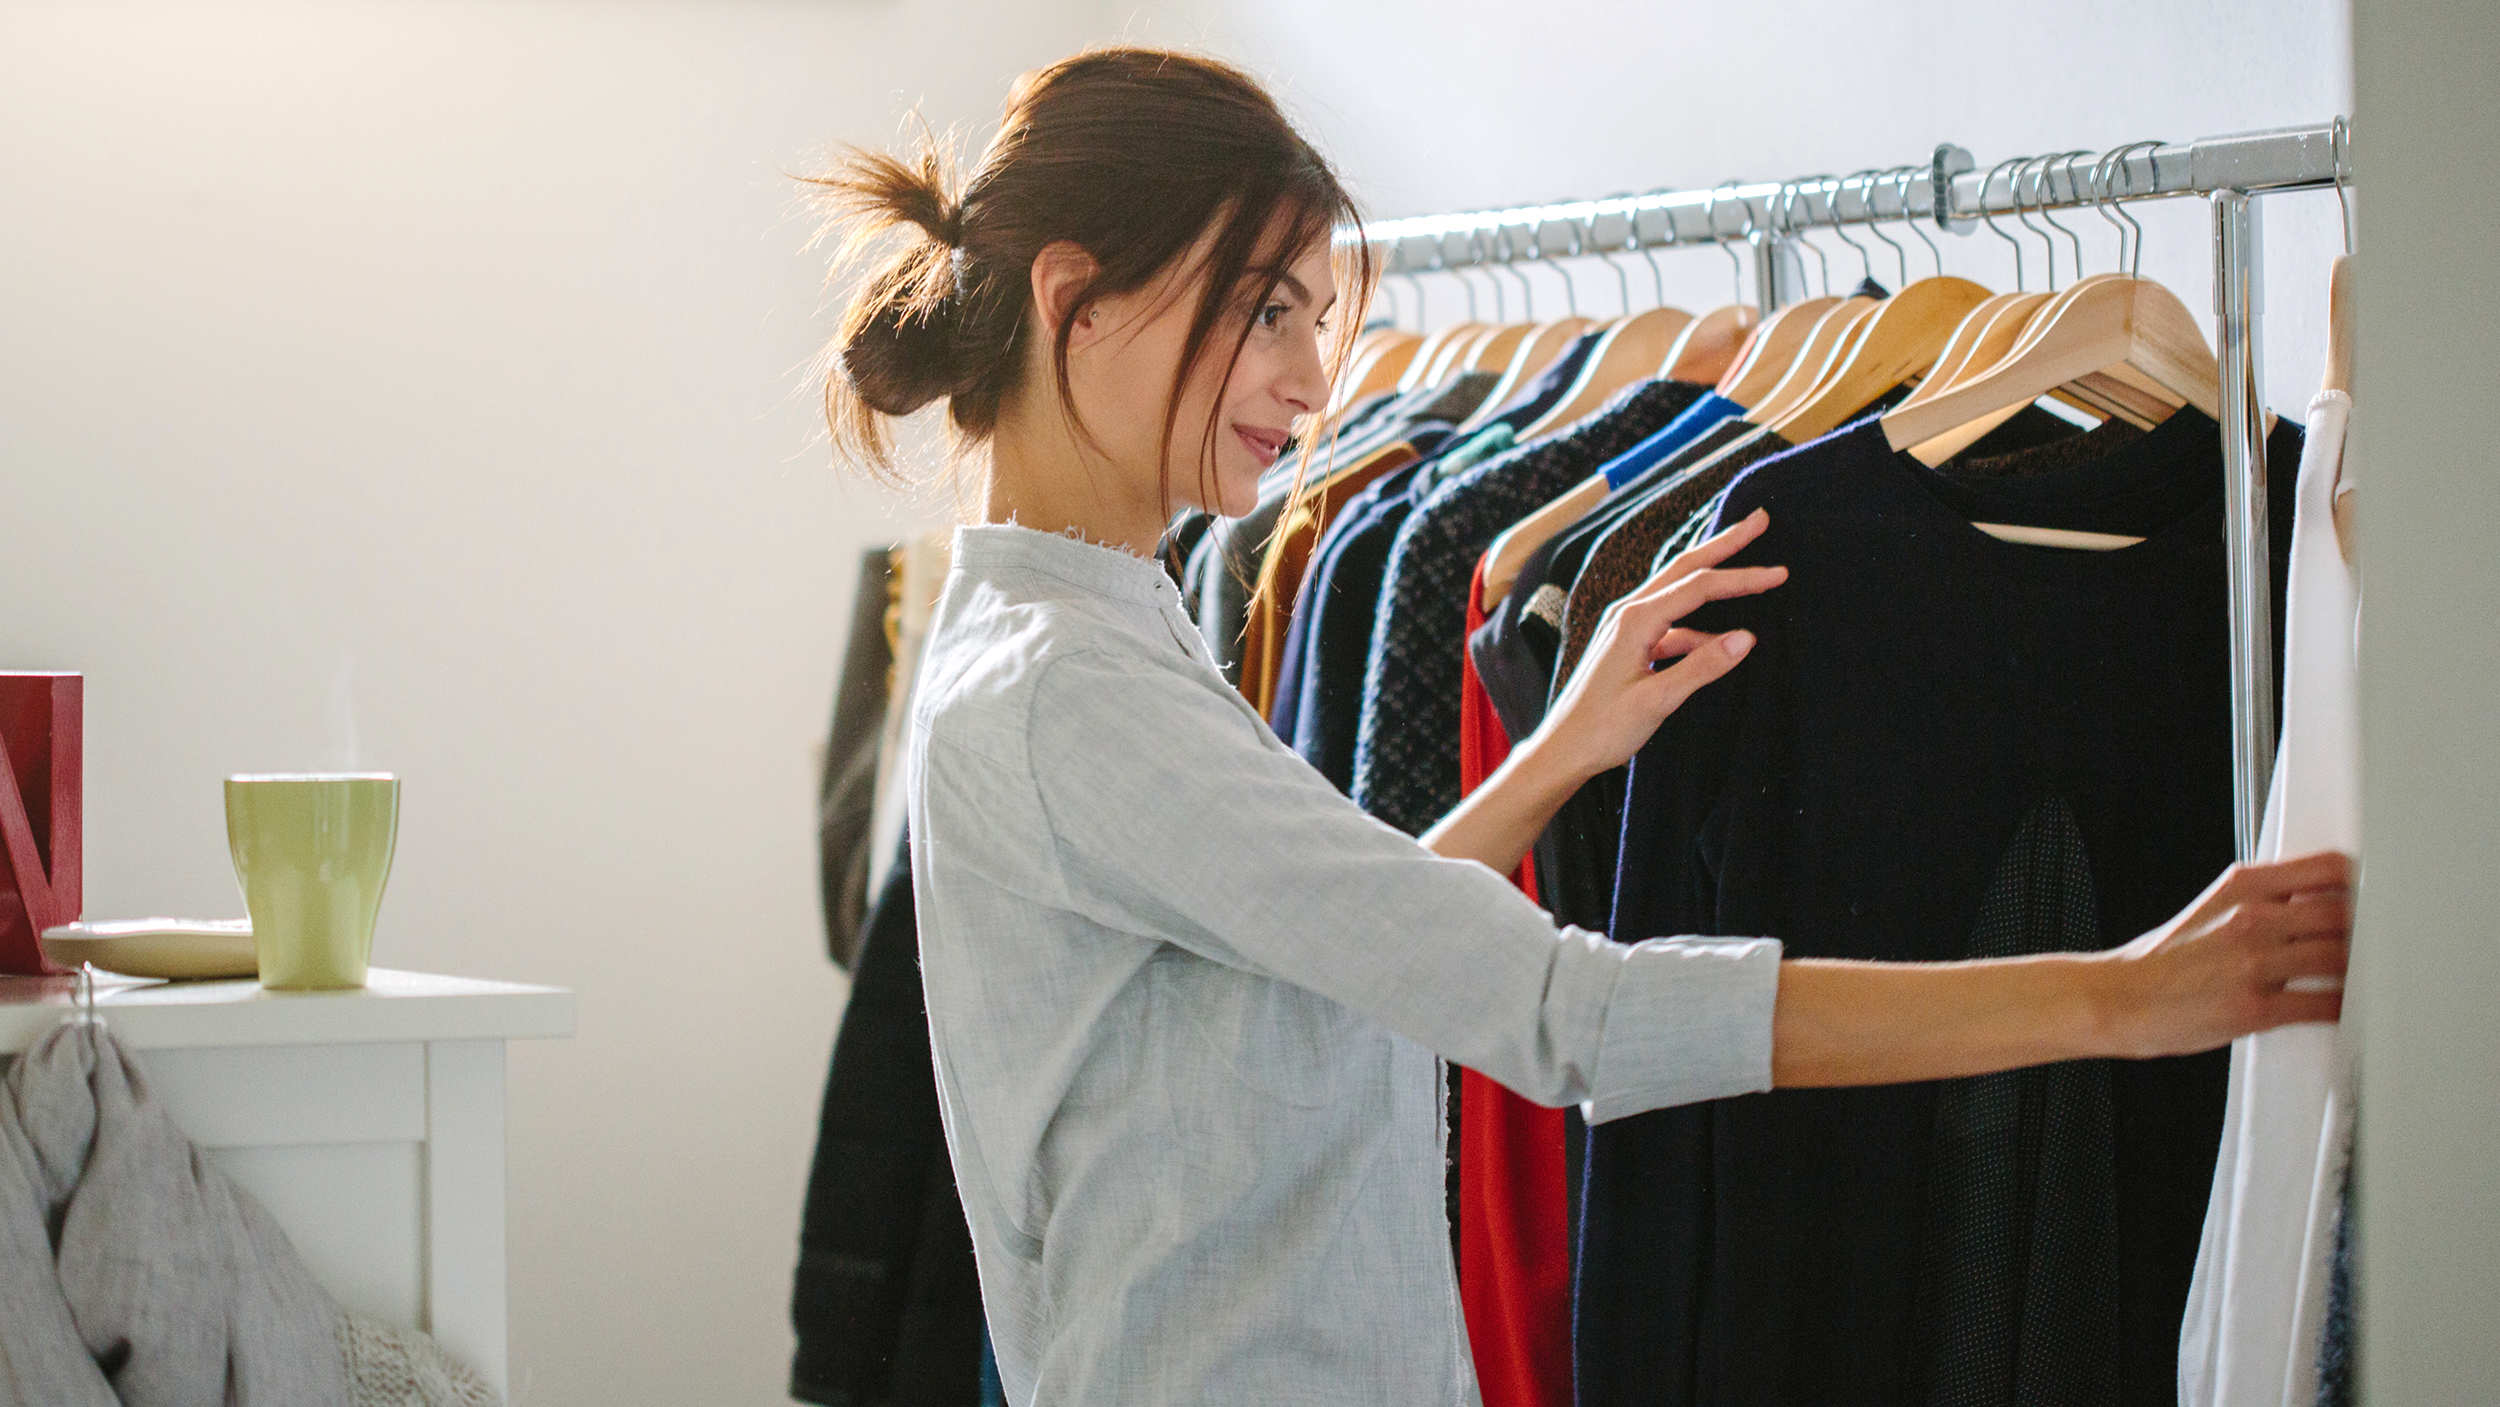 “Smart Shopping: How to Create a Stylish College Wardrobe – A Comprehensive Guide to Building a Fashionable and Functional Closet for Campus Life”